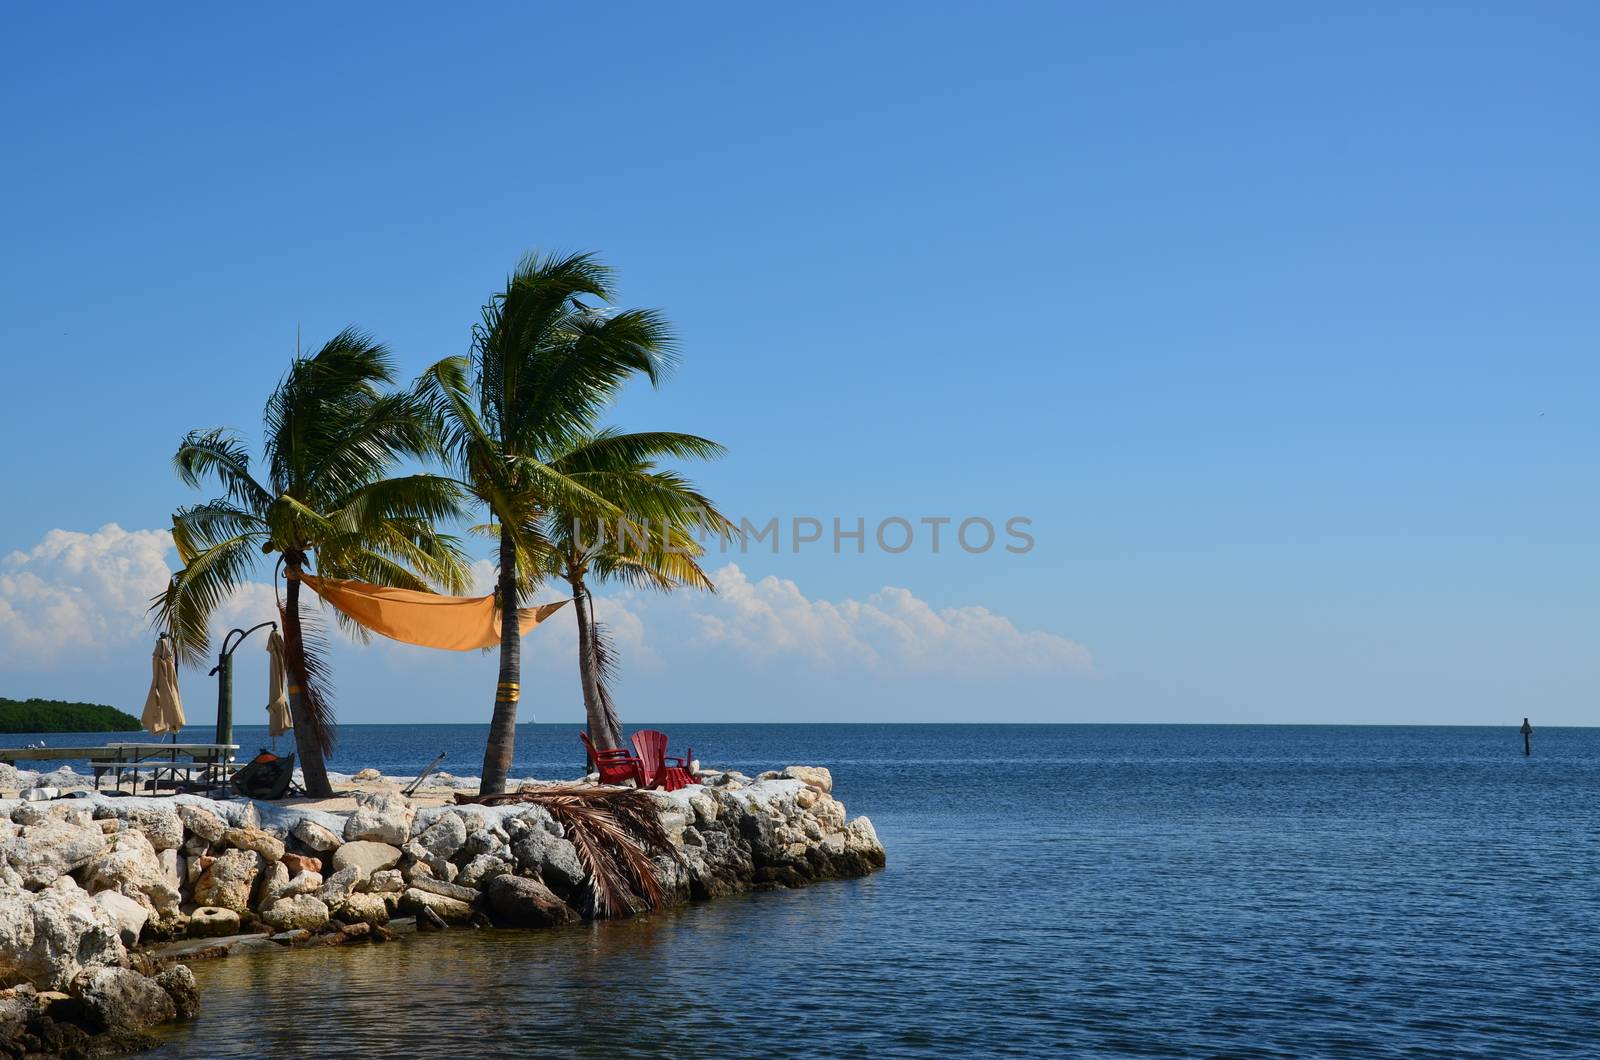 A sunny day and light breeze make this a quiet place to sit and enjoy the ocean in the florida keys. Two charis and a few palm trees complete the scene.